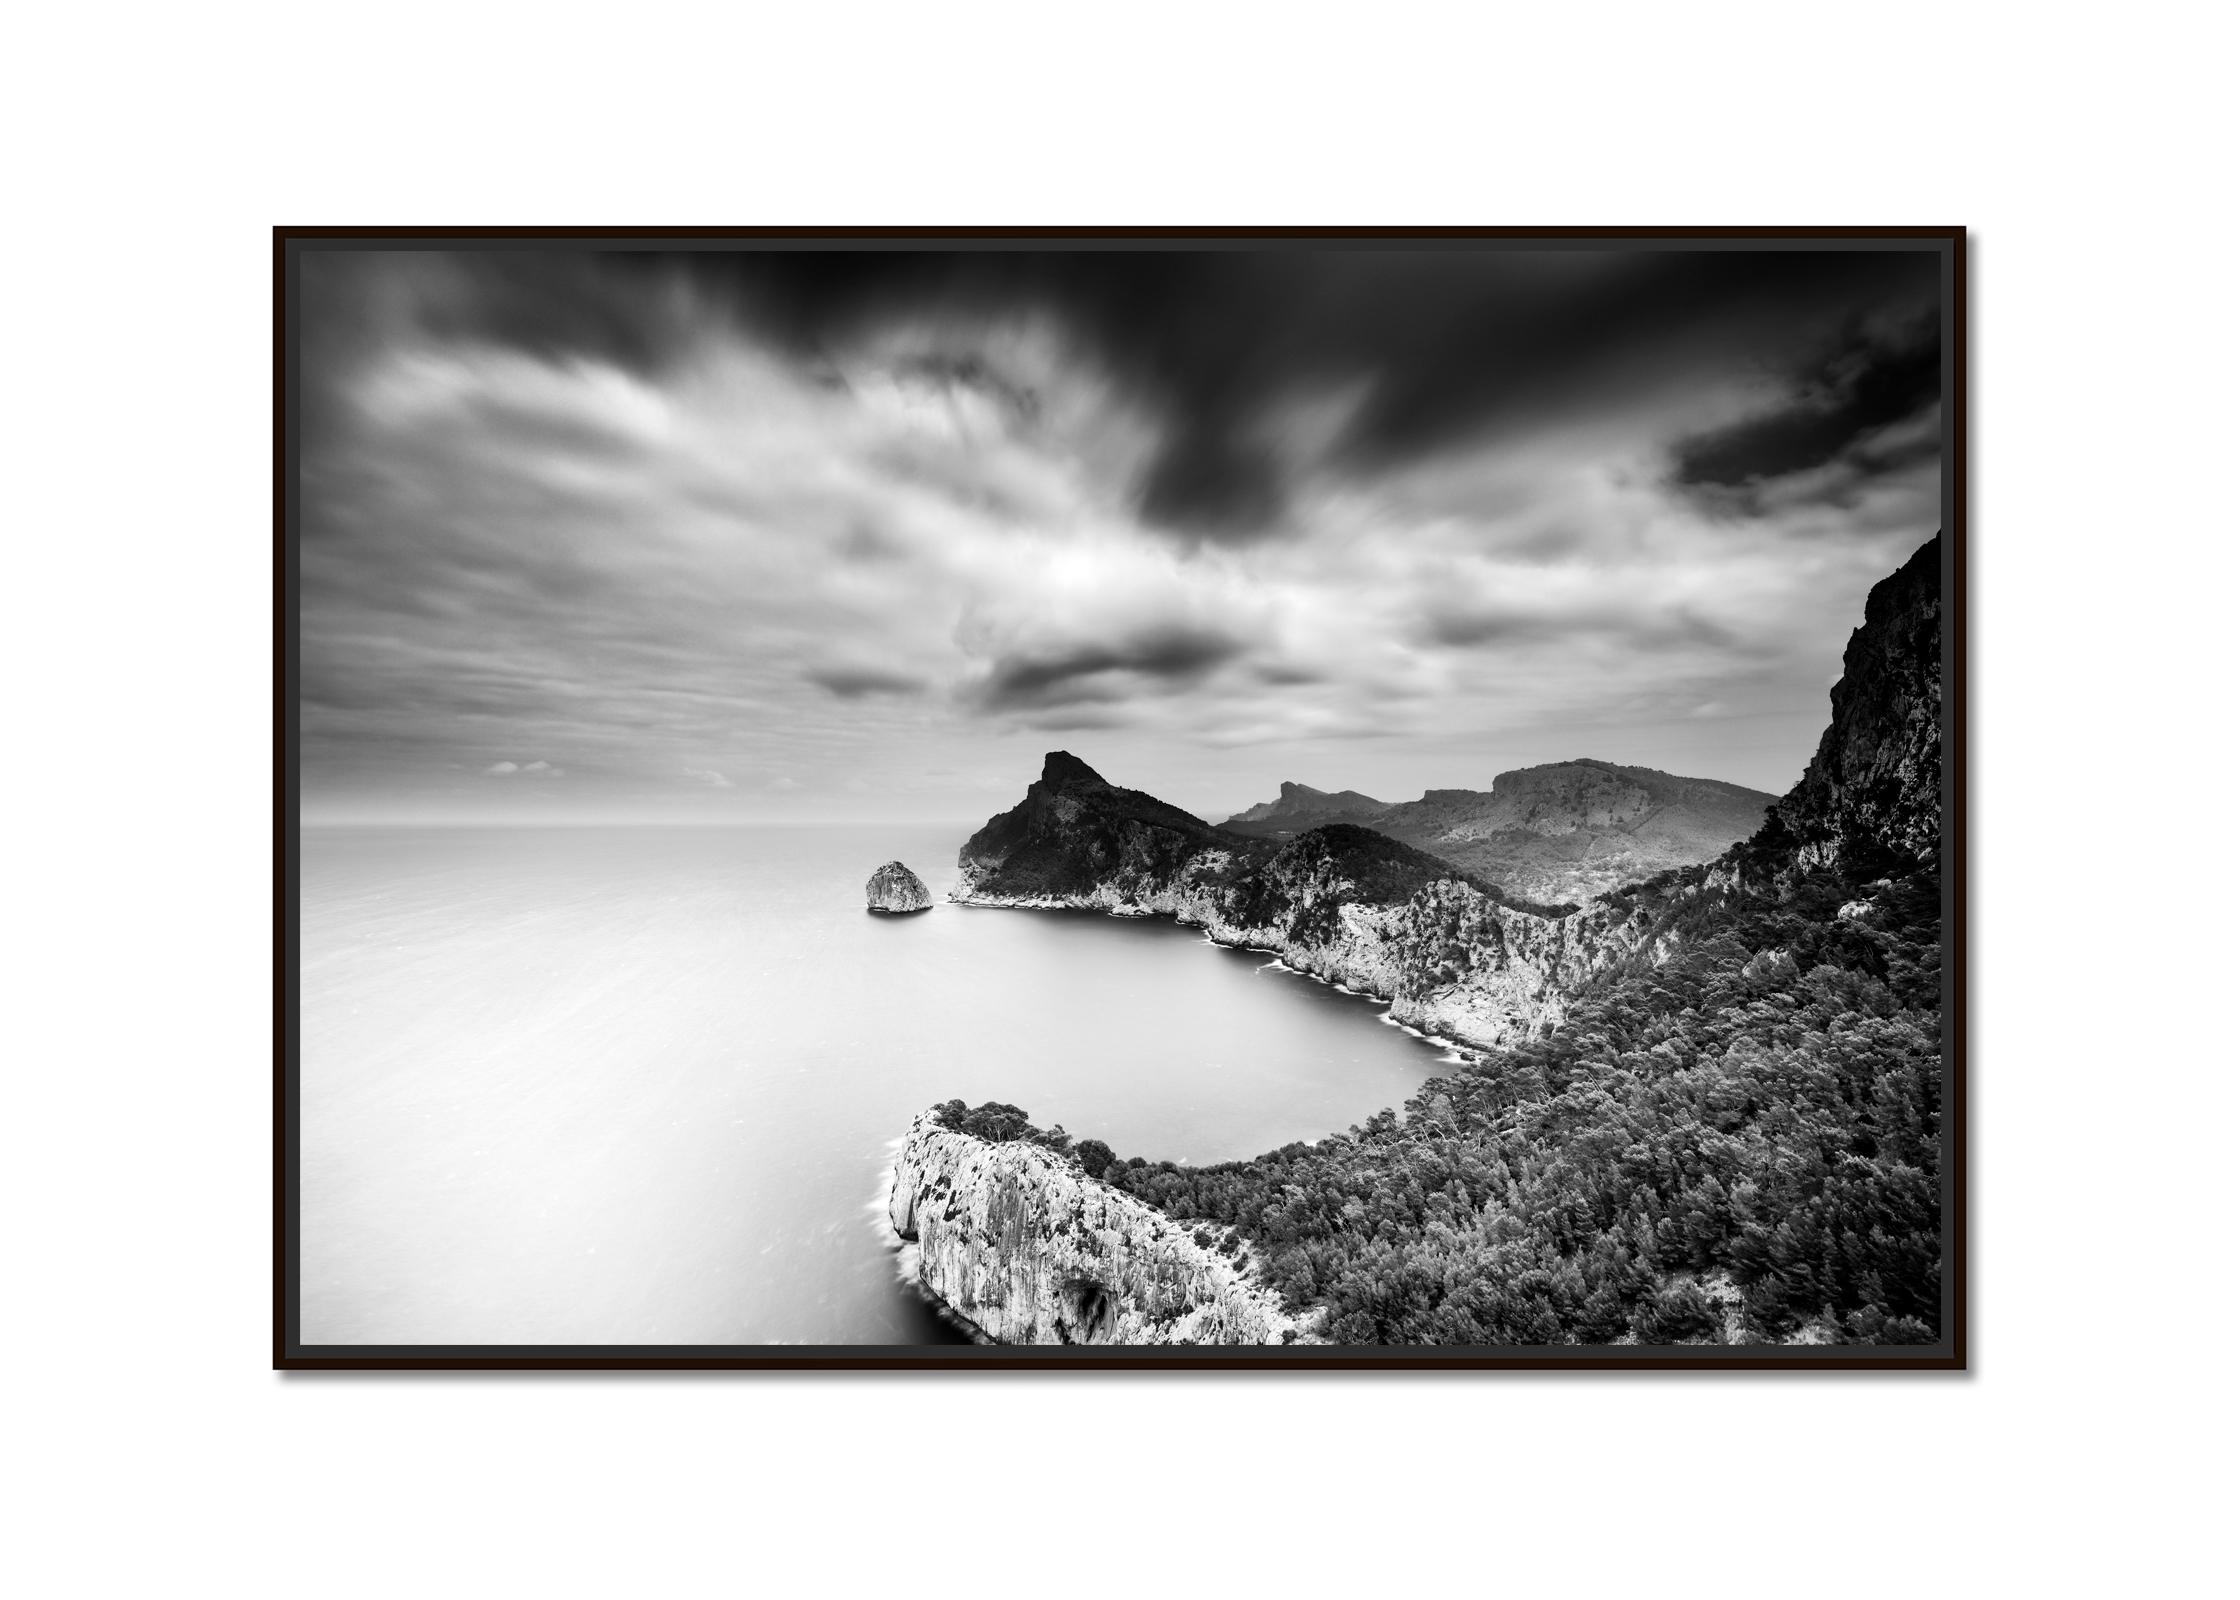 Mirador Es Colomer, Mallorca, Spain, Black and white photography, art landscape - Photograph by Gerald Berghammer